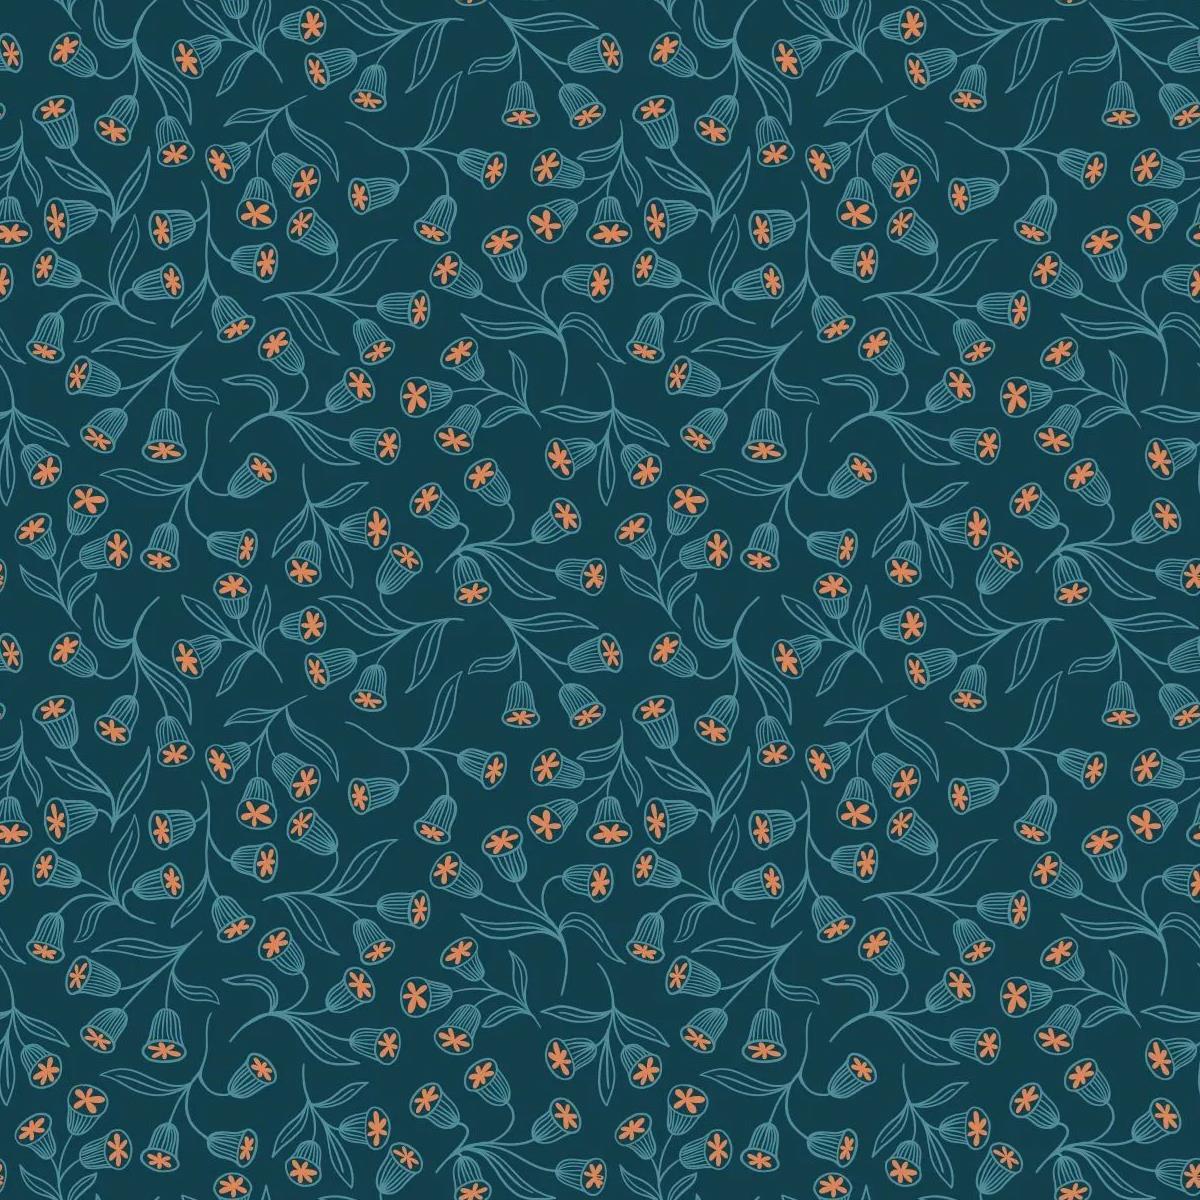 /images/product-images/2020images/FashionFabric/CraftCotton/LINov21/A544.3-Enchanted-flowers-on-dark-teal-with-copper-metallic-01.jpg